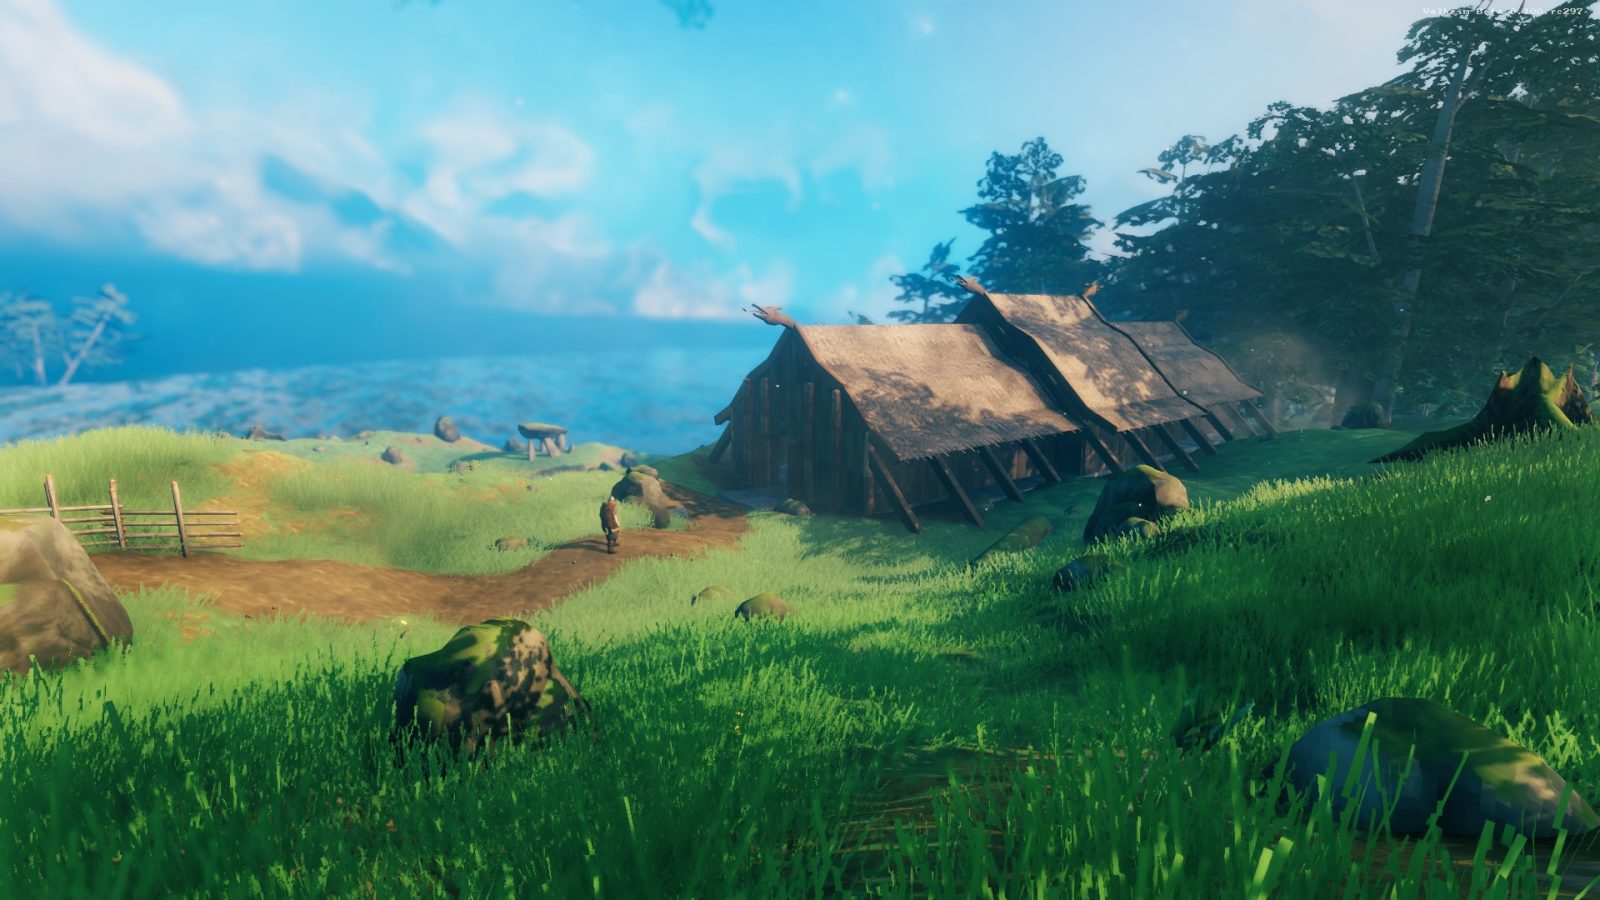 Valheim Gets Cross-play, Just In Time For Xbox Game Pass Launch